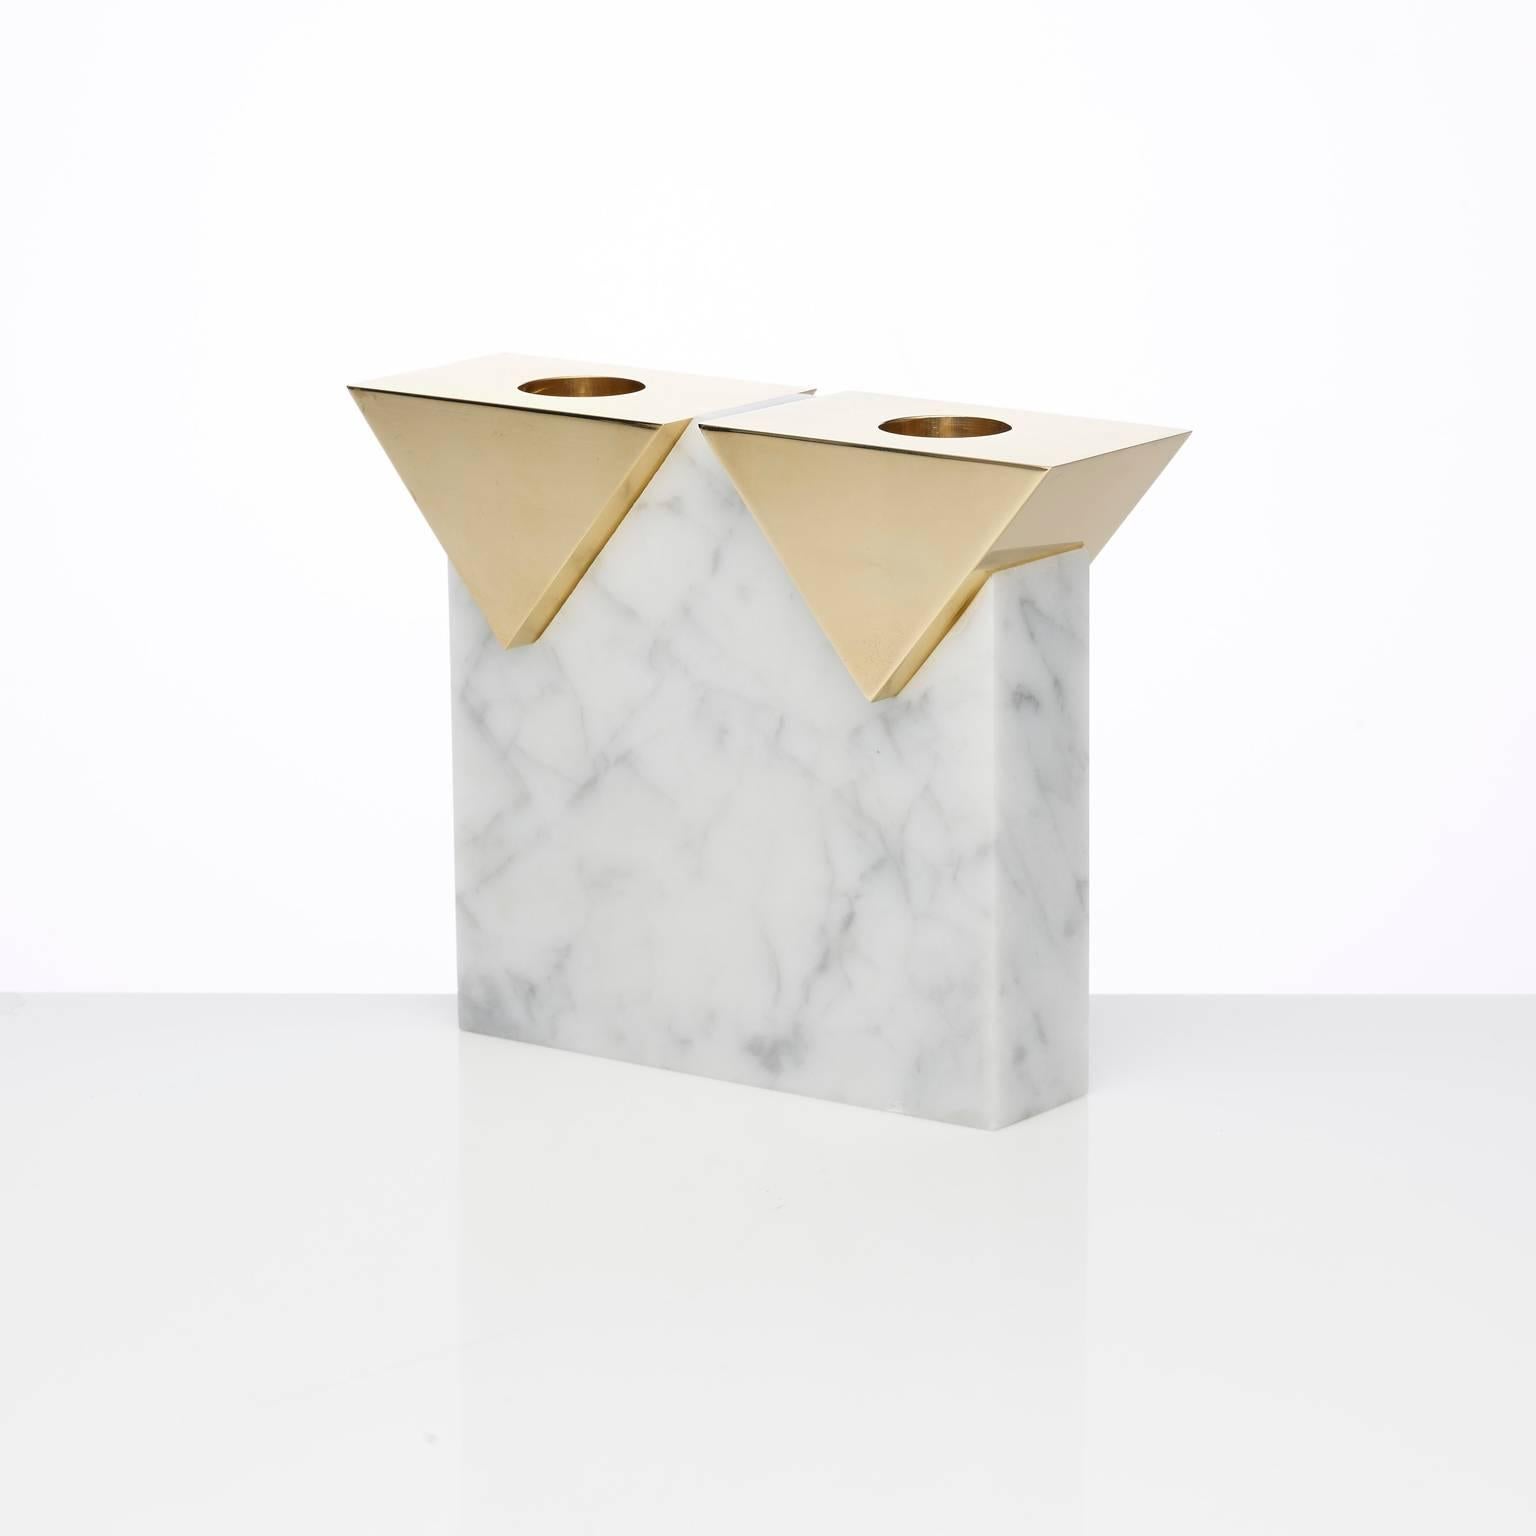 A double candleholder based on the architecture of our iconic Invisible Cities candleholders.
A honed Carrara tower balances two polished brass triangular pieces.
The brass has been polished to a mirror finish and left untreated which will develop